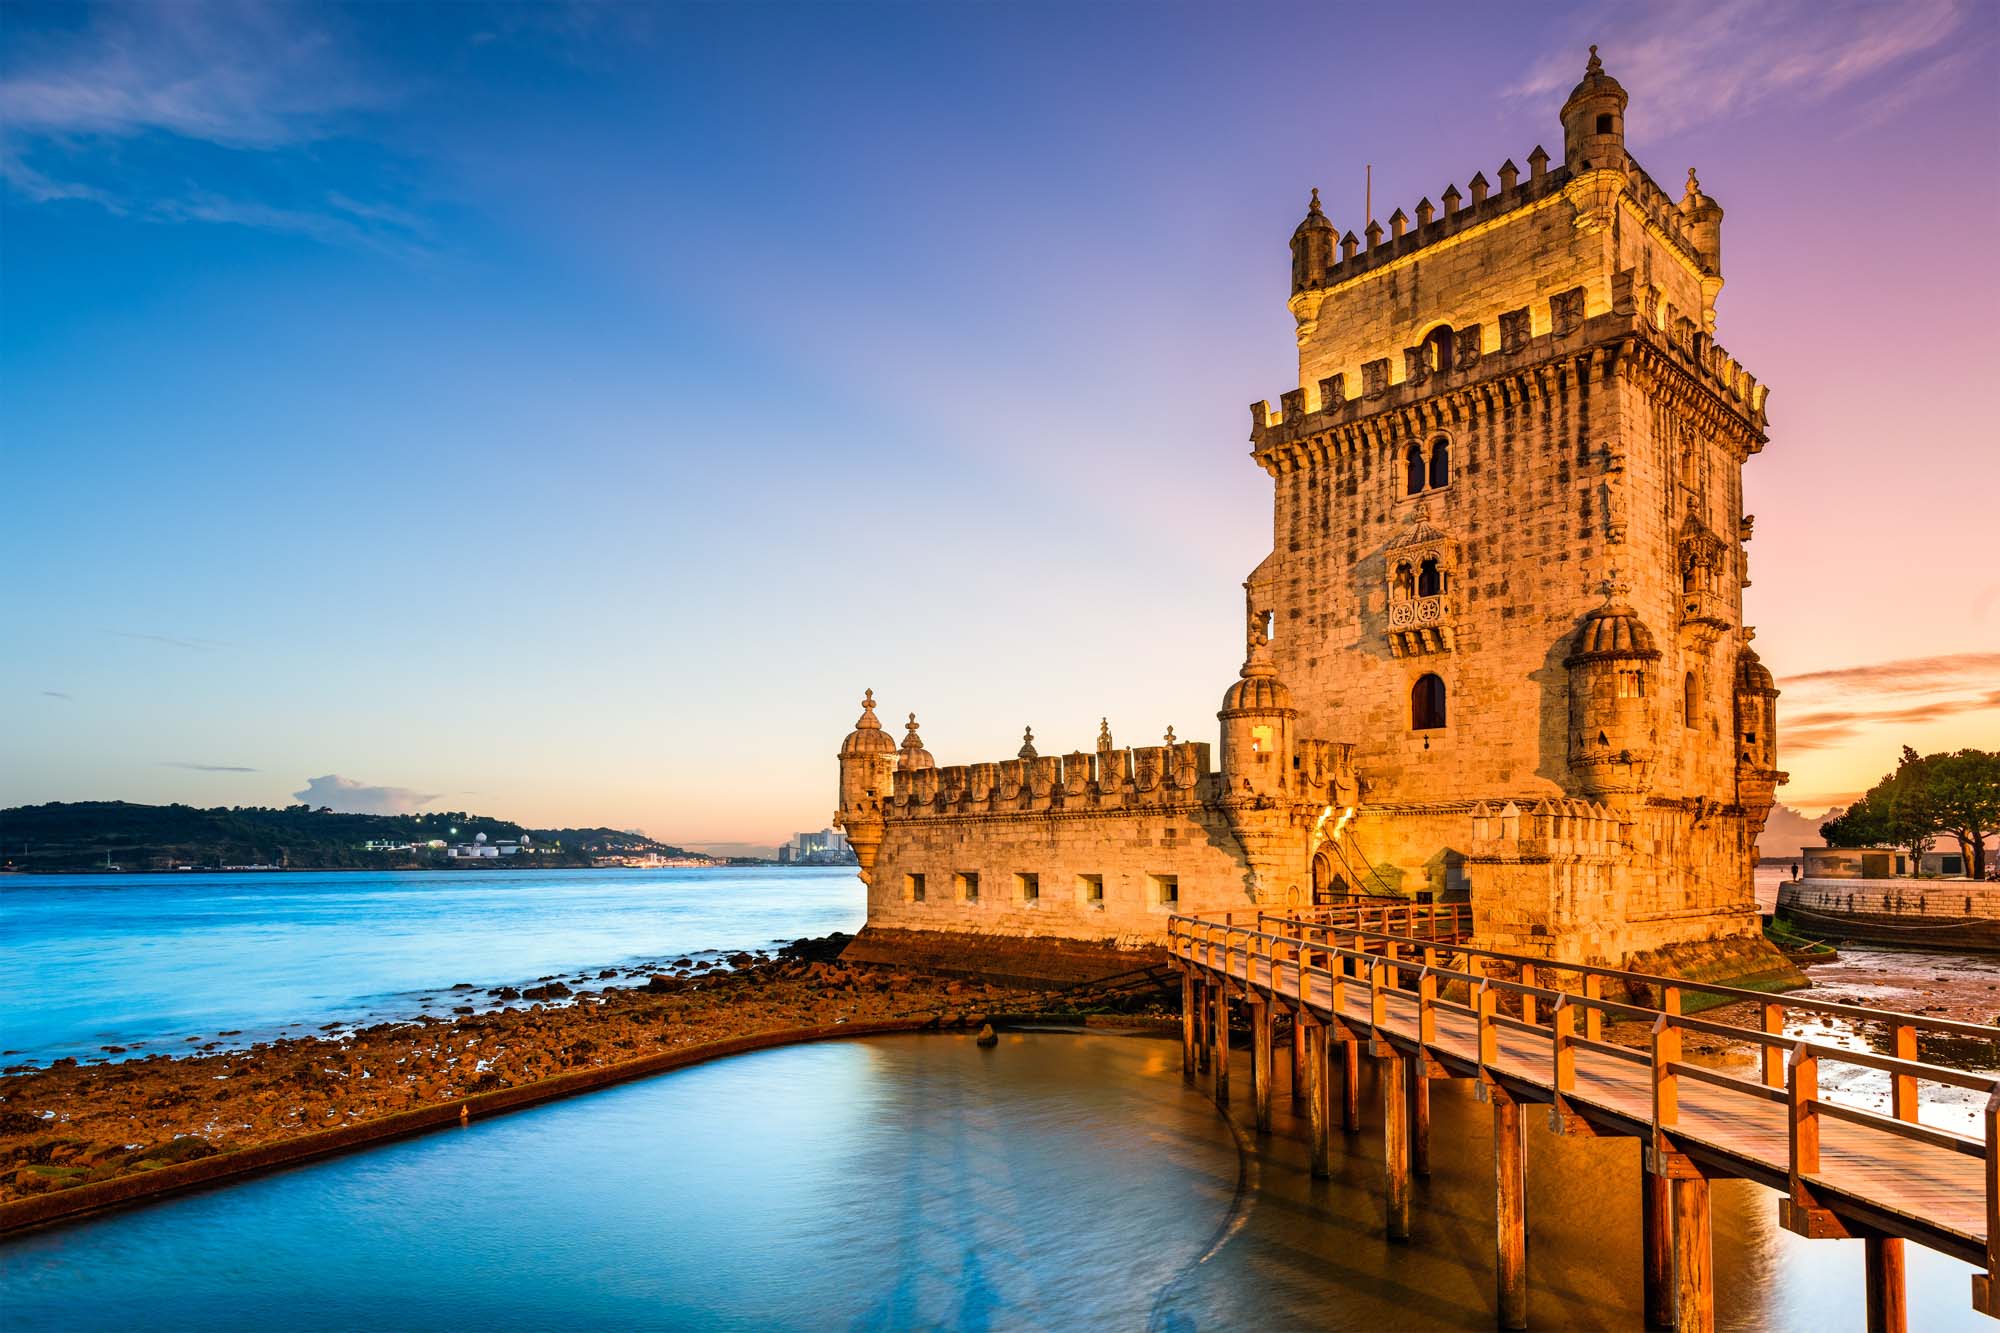 Which popular market in Lisbon is a great place to try local food and buy fresh produce?